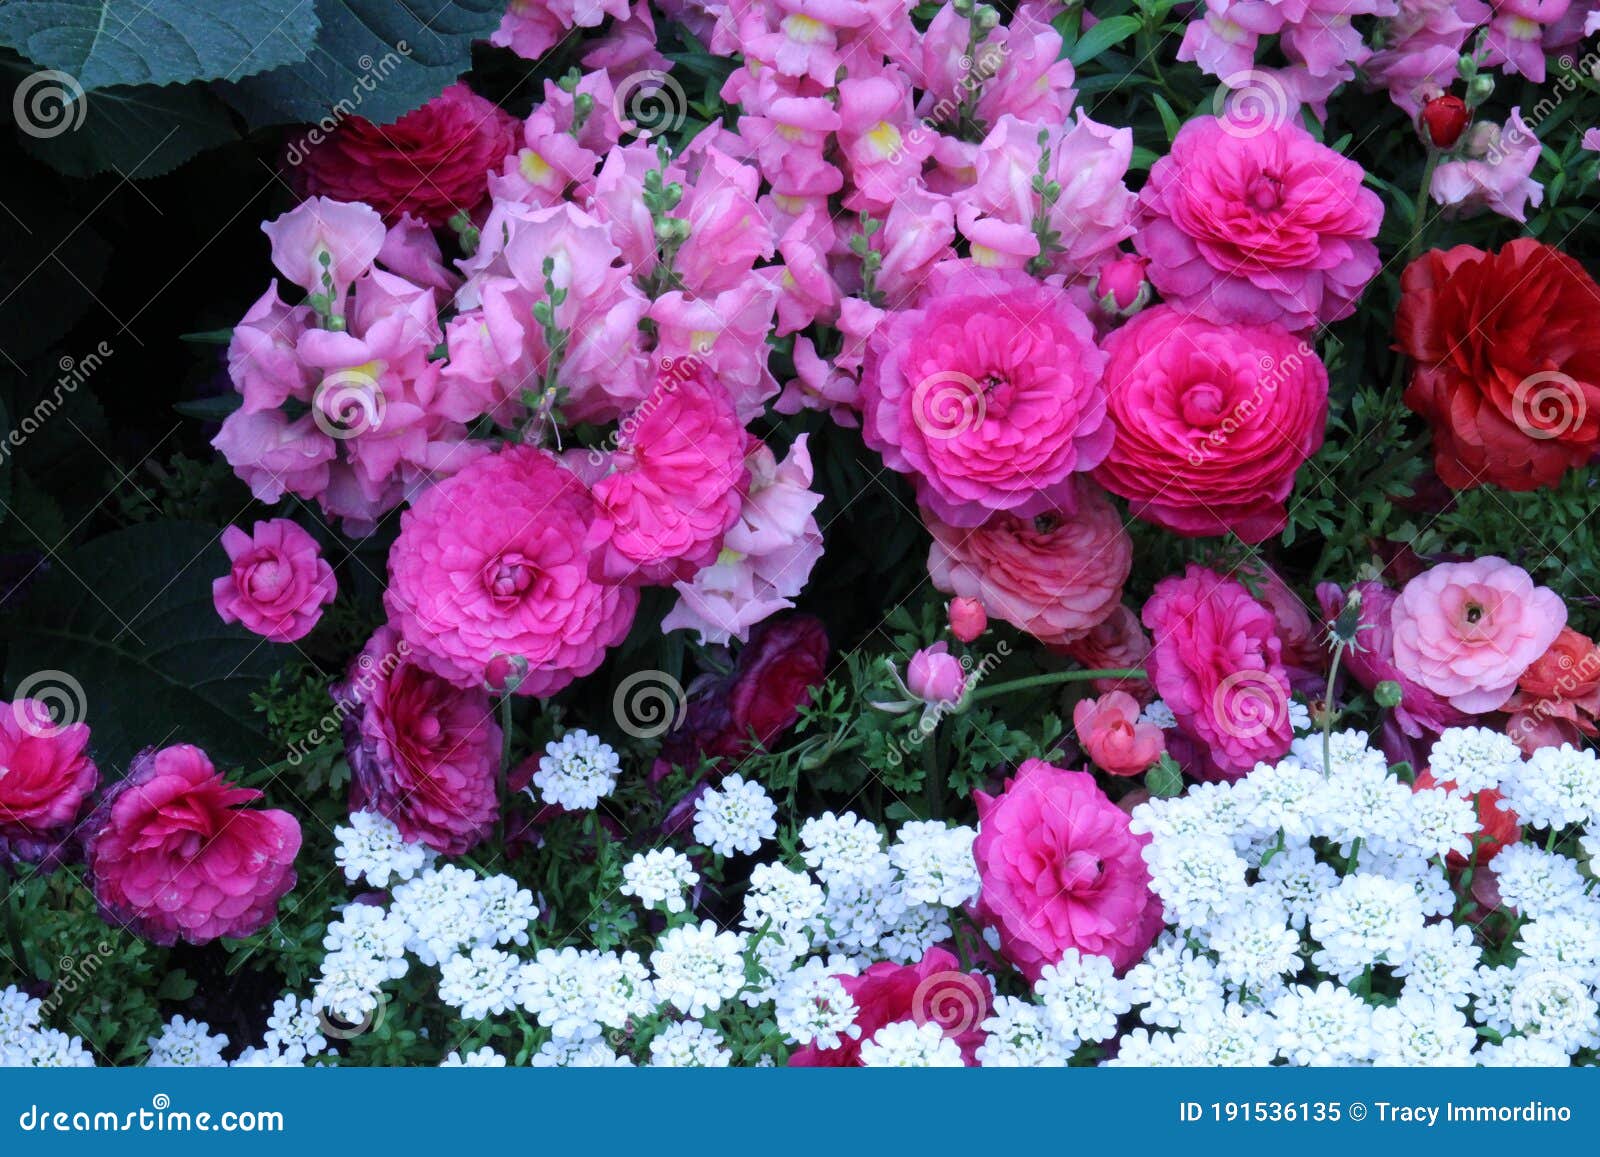 Pink Snapdragons Pink And Red Ranunculus And White Candytuft Flowers Blooming In A Garden Stock Image Image Of Peach Delicate 191536135